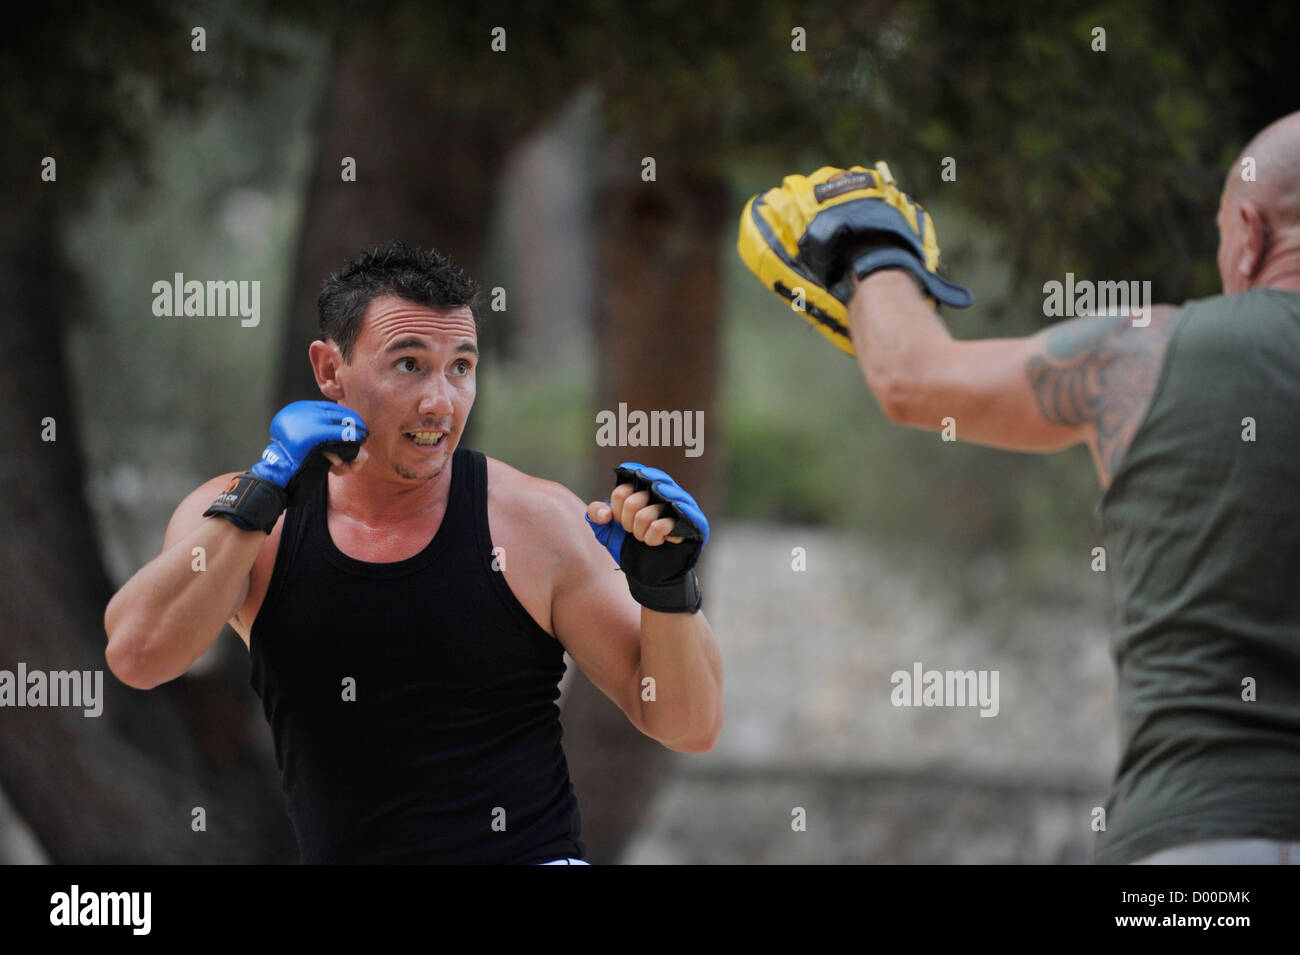 two men practice martial arts in a park Stock Photo